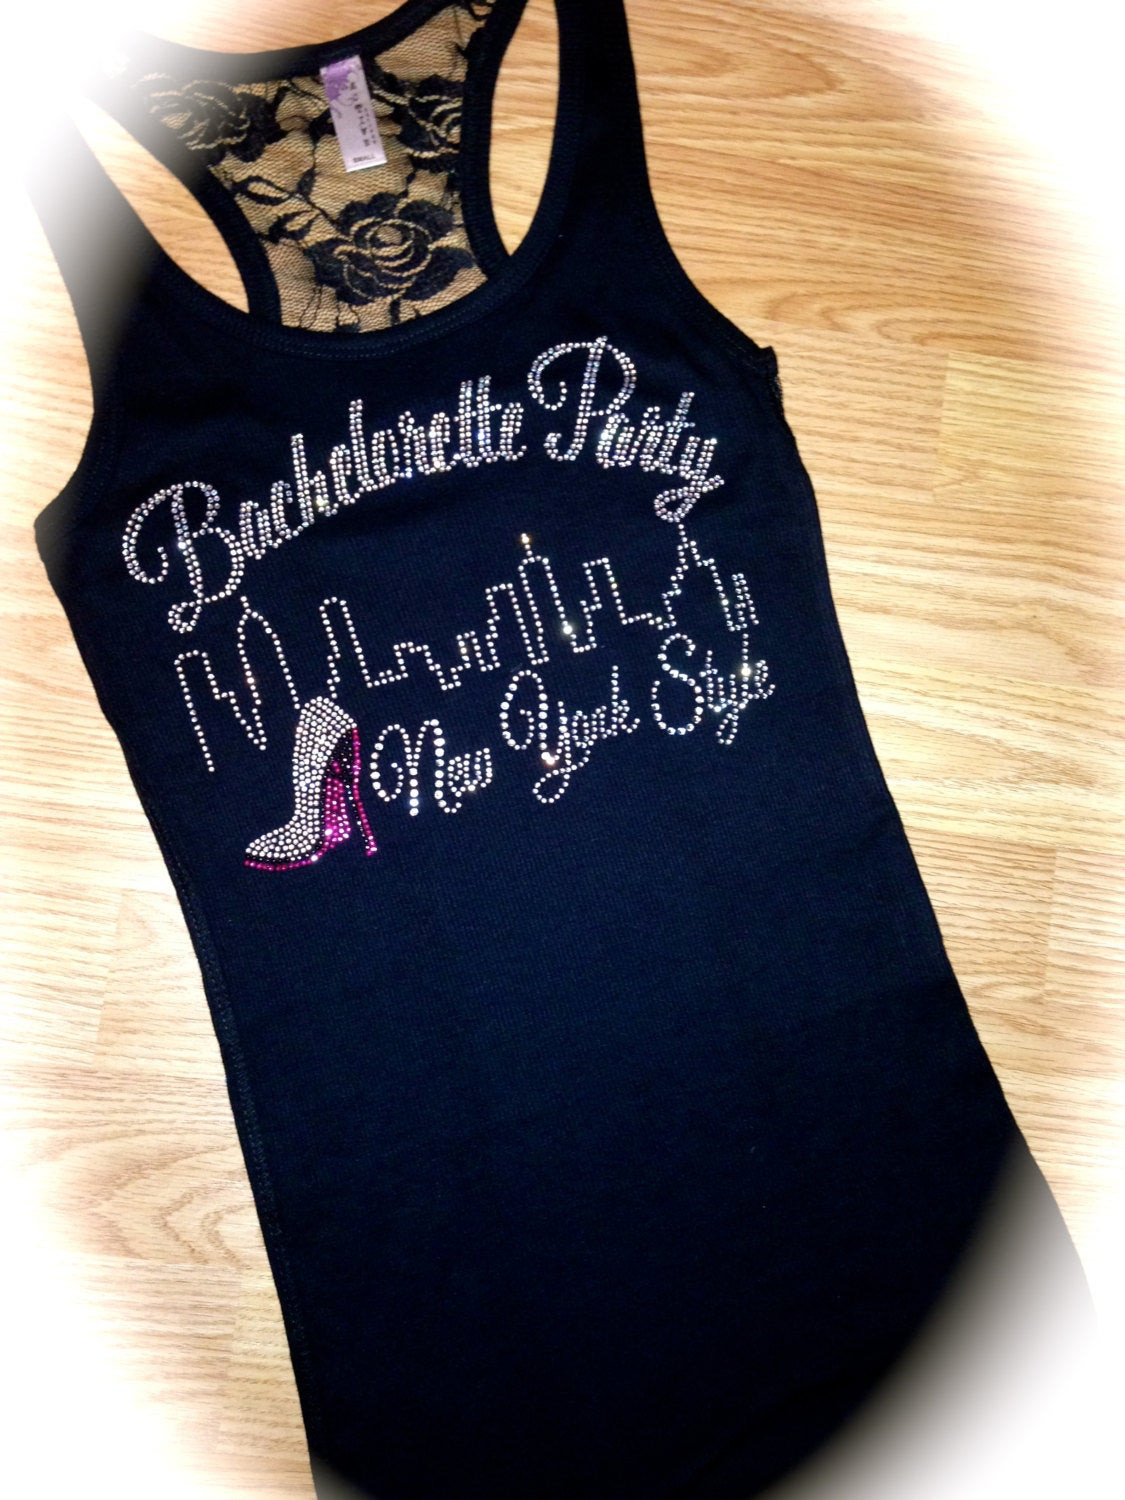 Bachelorette Party Ideas Nyc
 New York Bachelorette Party Bling Tank Tops Lace Bridesmaid